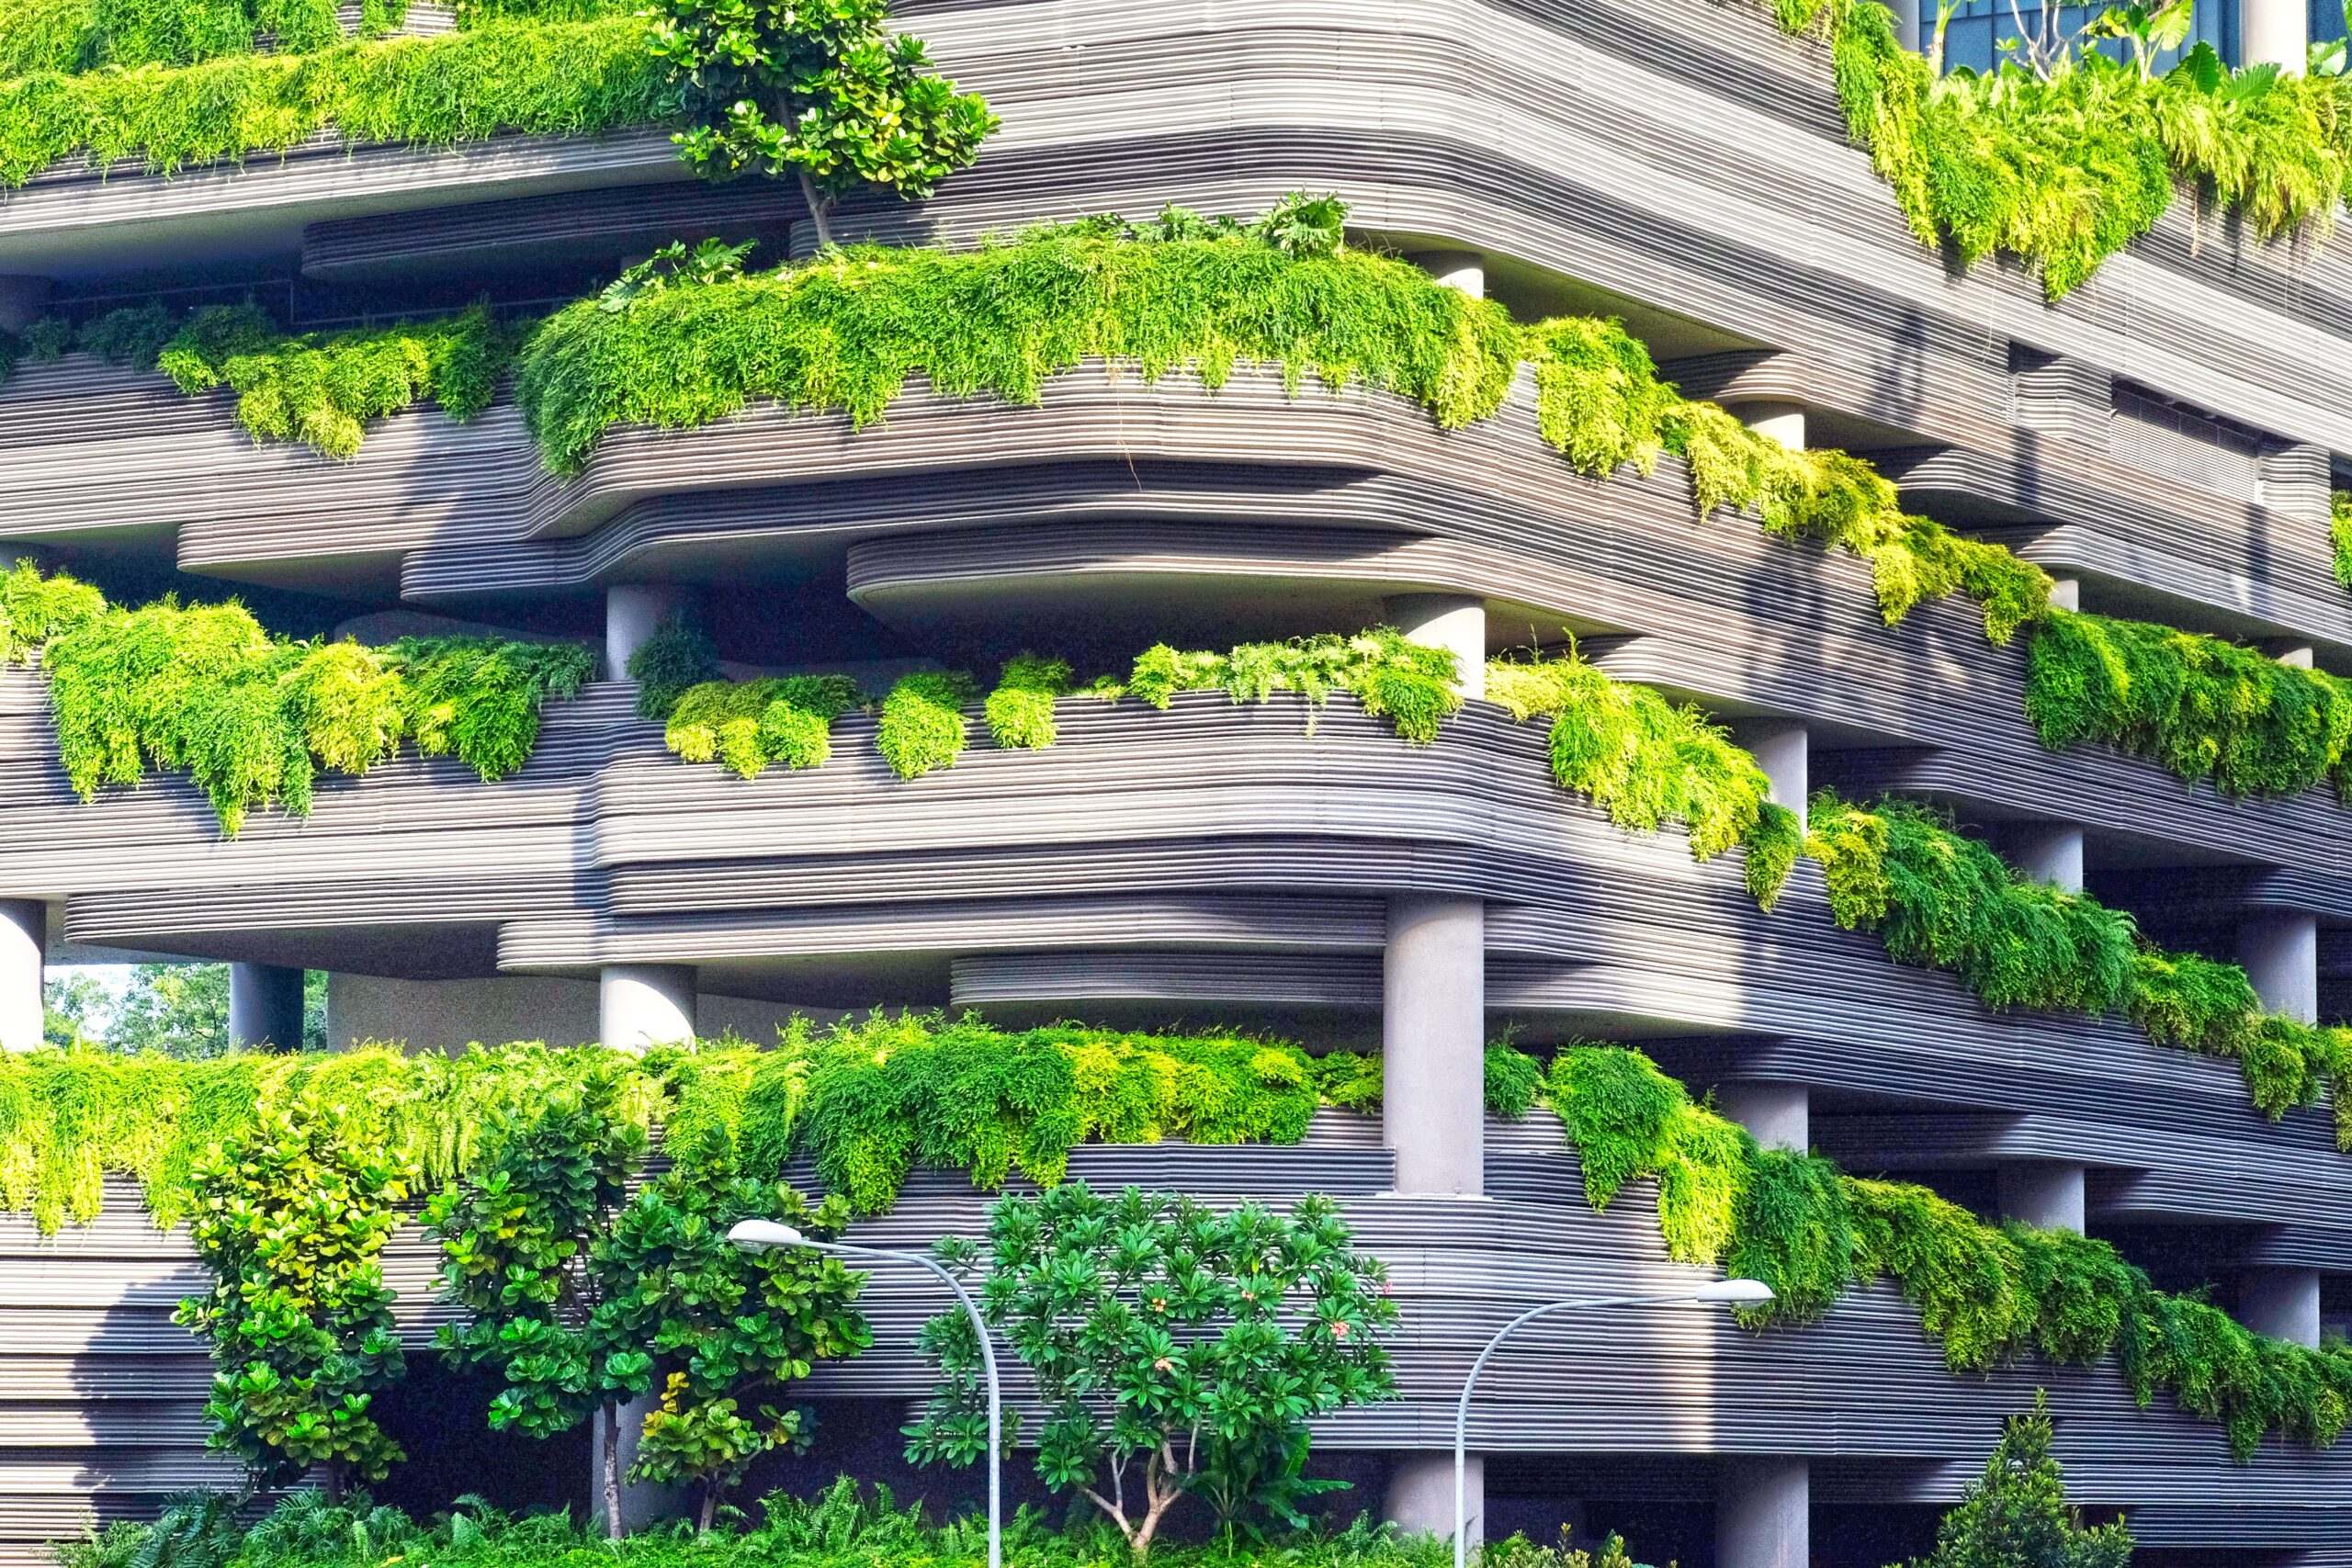 Developments in Green Building Within Emerging Global Markets